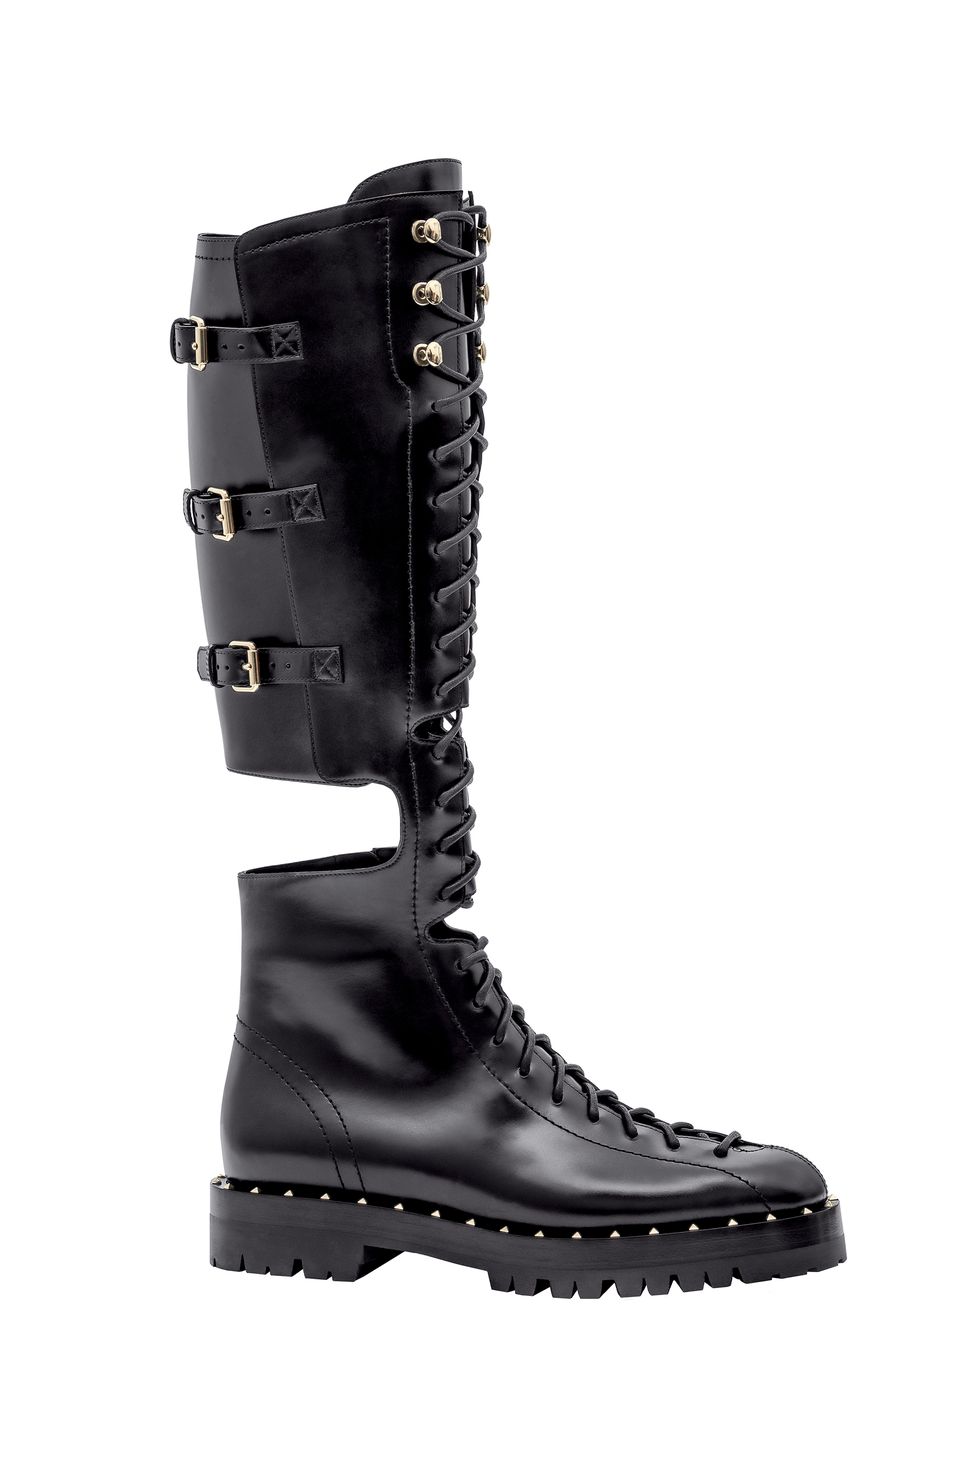 Footwear, Boot, Shoe, Work boots, Knee-high boot, Riding boot, Durango boot, Snow boot, Motorcycle boot, 